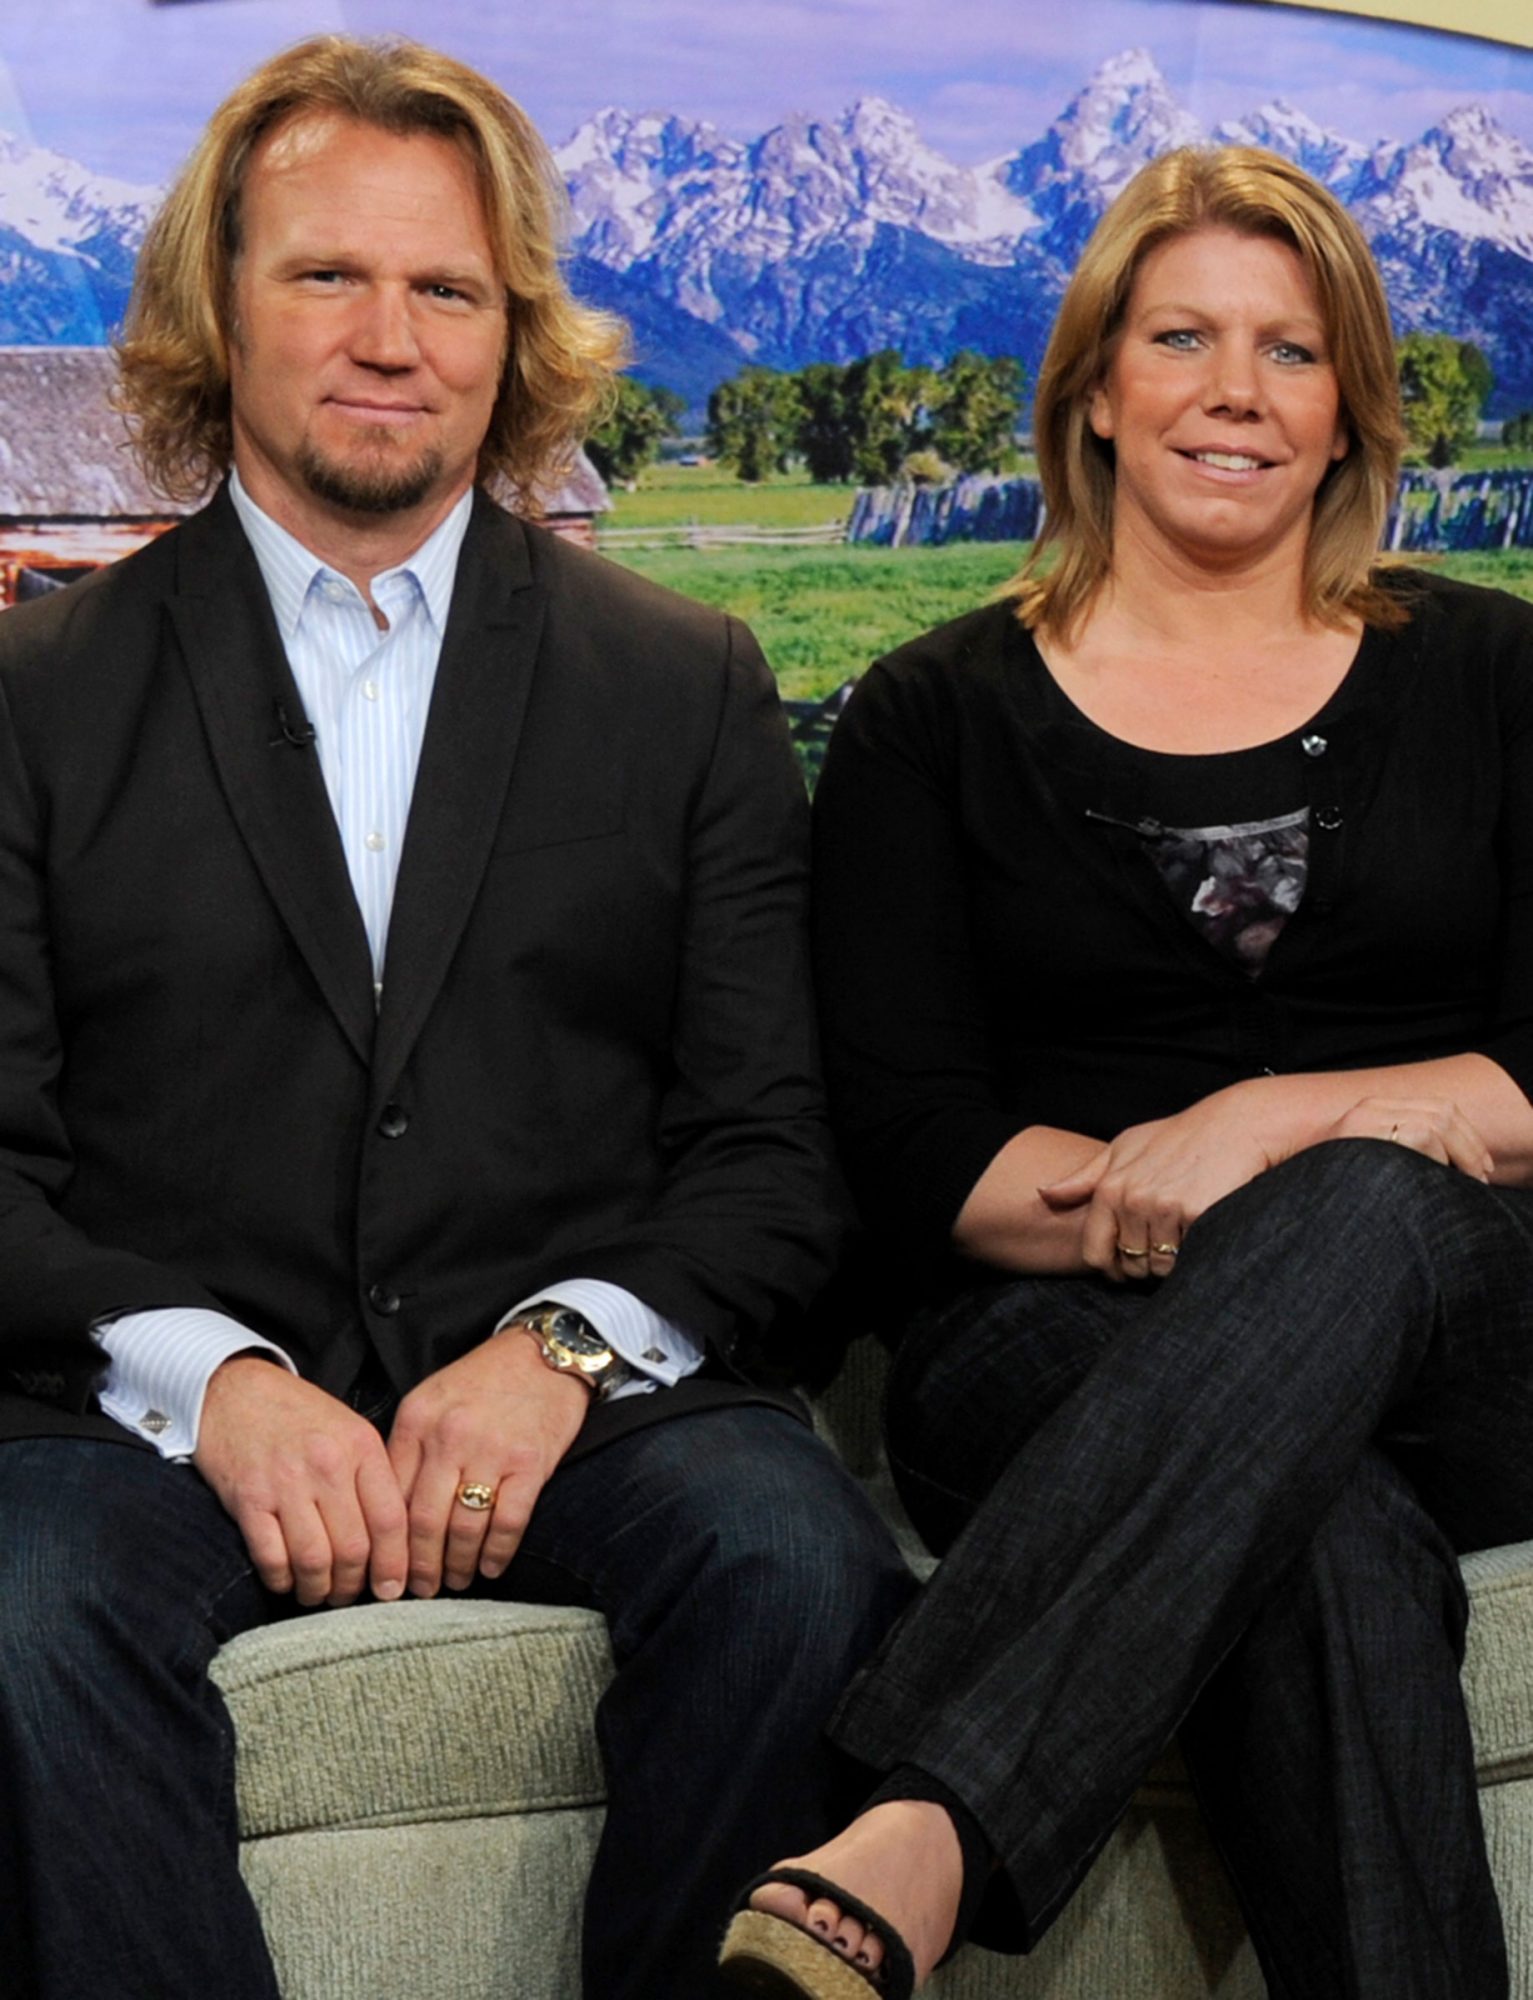 Sister Wives: Kody Brown Says 'There Has to Be a Spark' for Meri to Get a 'Sexual Relationship'